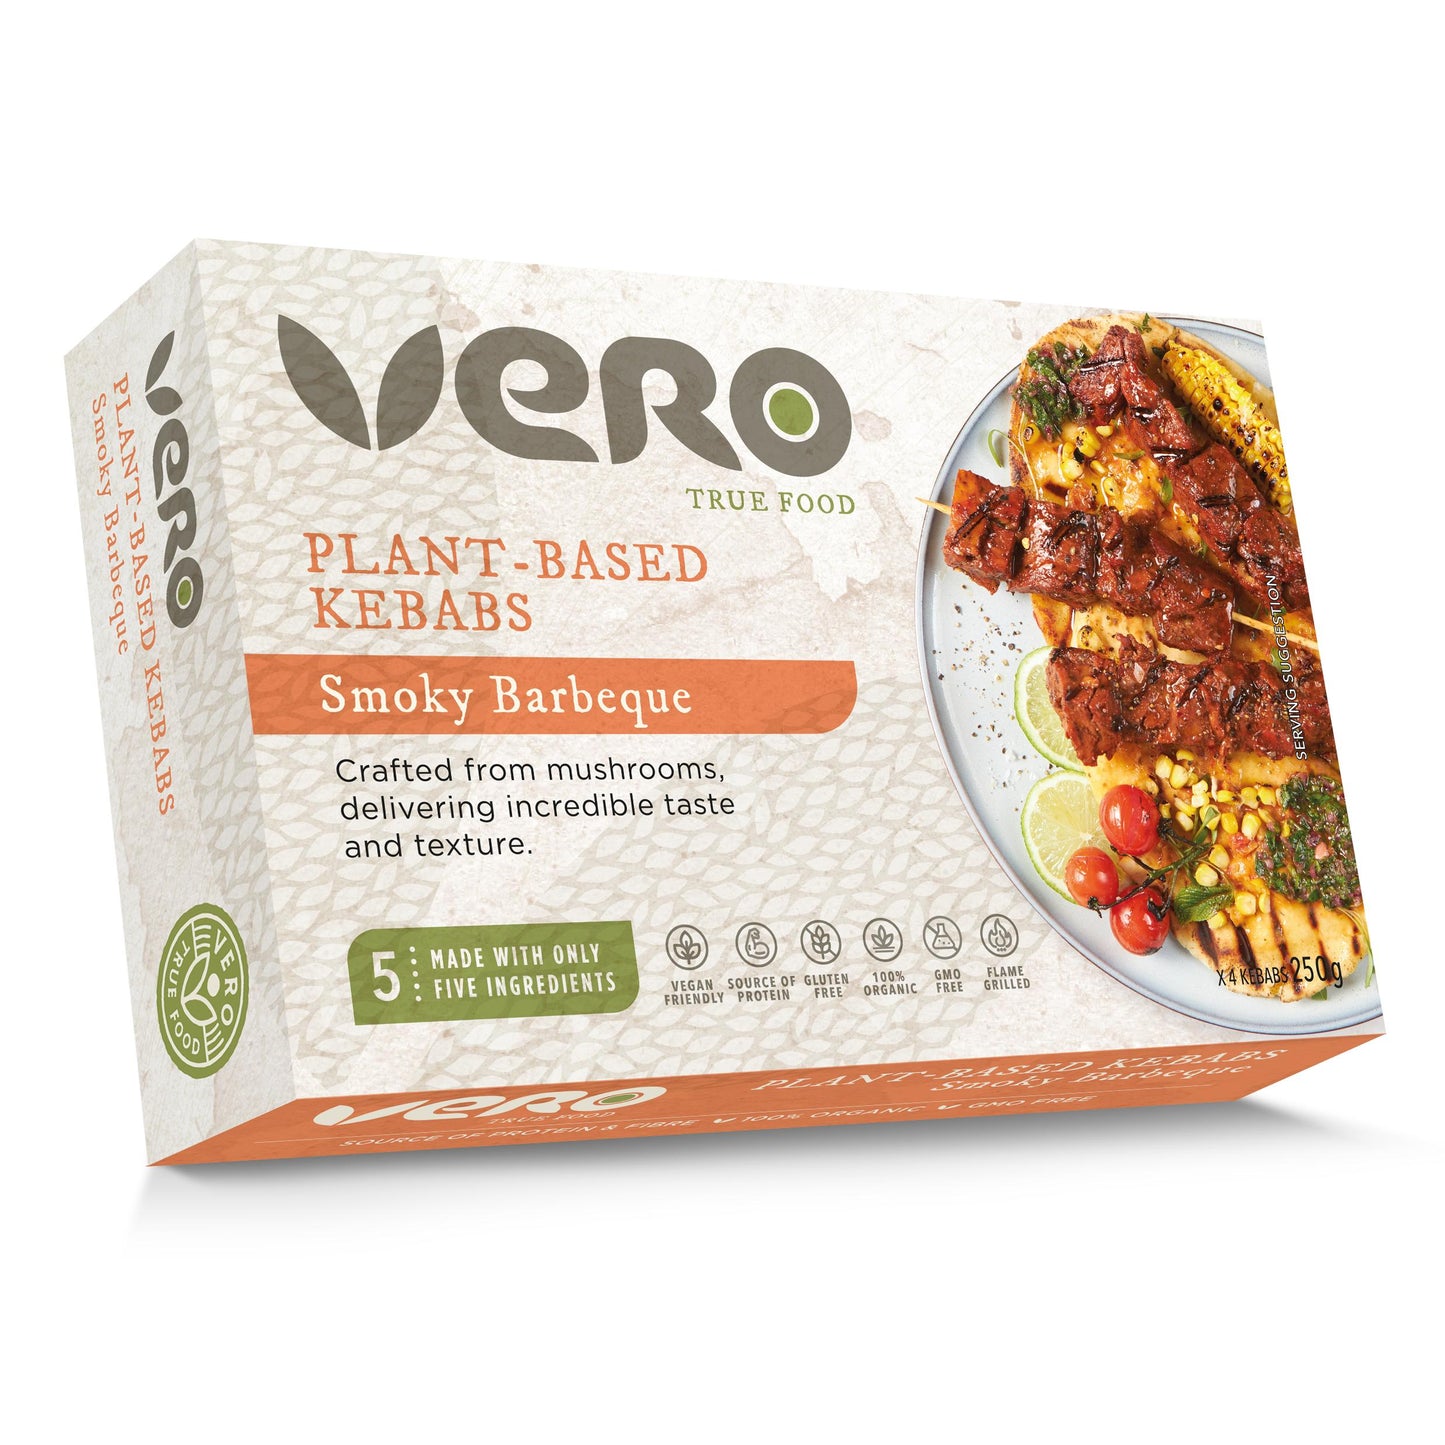 Plant-Based Kebabs - Smoky Barbecue